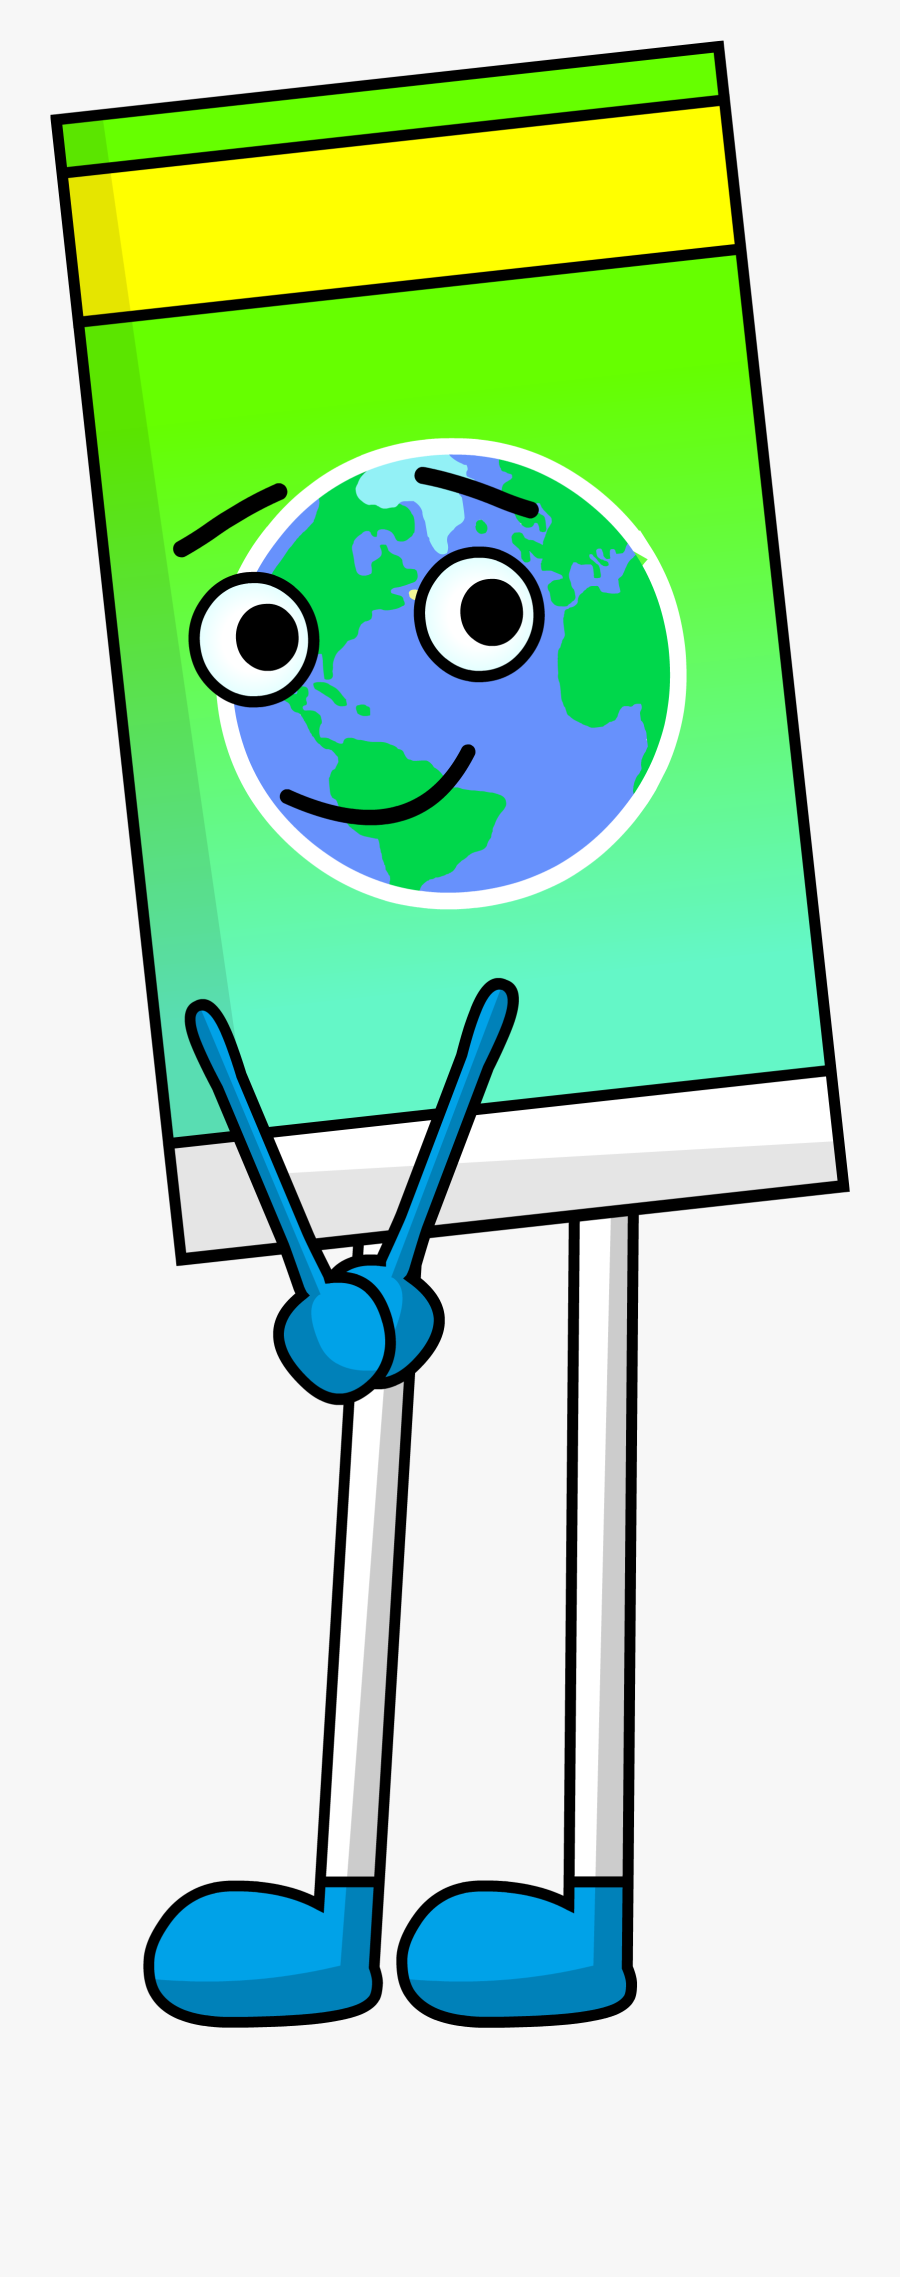 Animated Diversity Wiki, Transparent Clipart